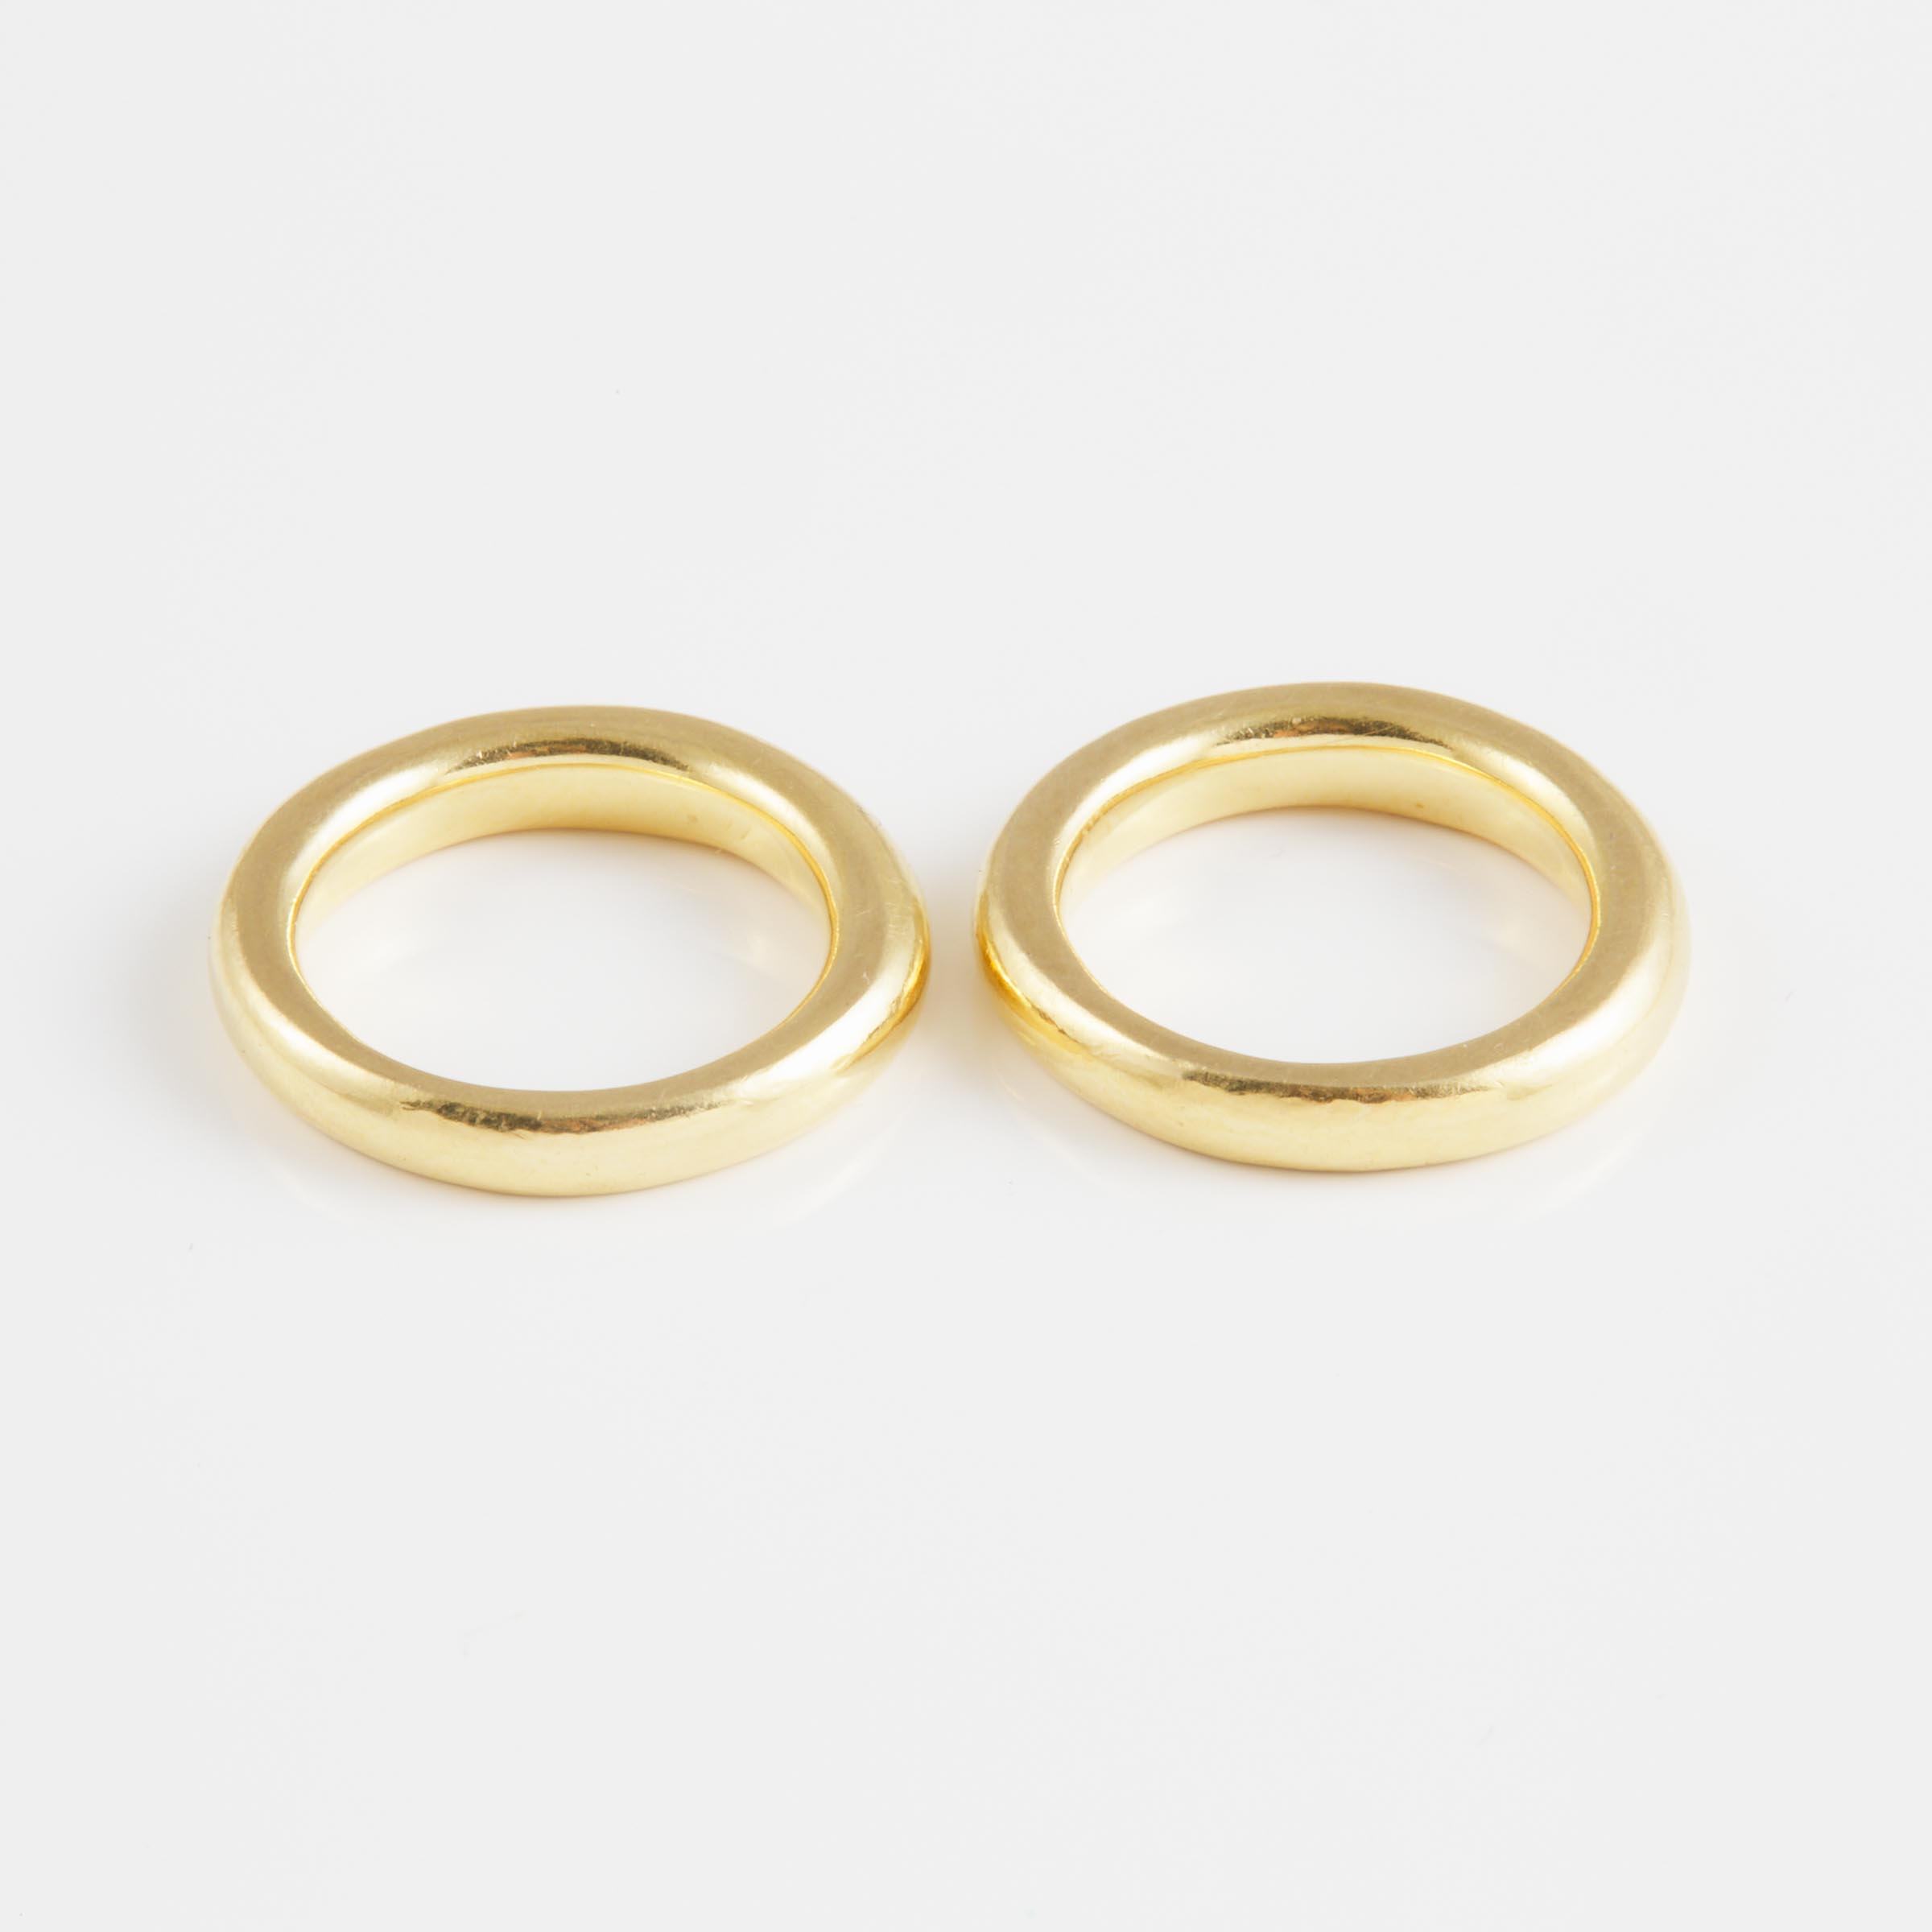 2 x 18k Yellow Gold Bands